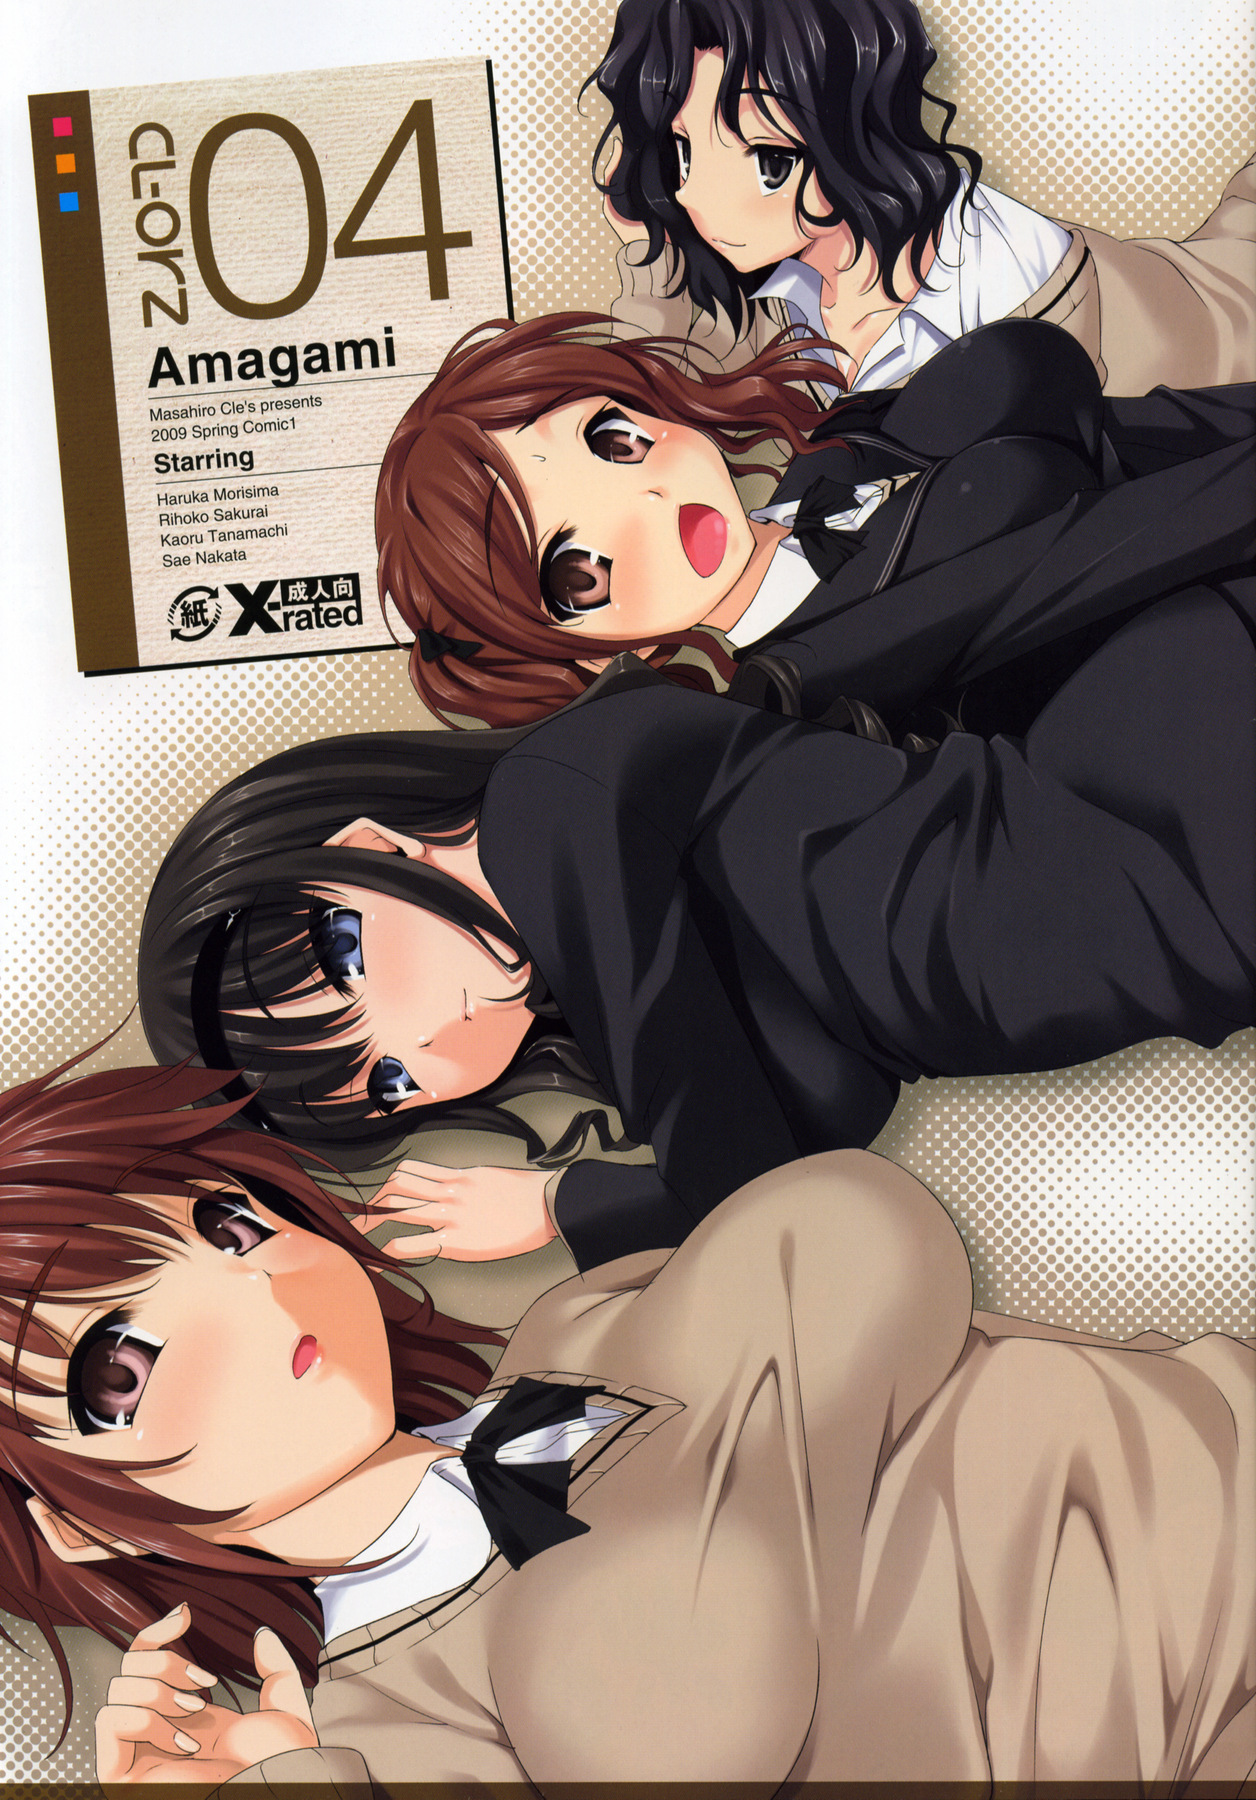 (COMIC1☆3)[Clesta (Cle Masahiro)] CL-orz'4 (Amagami) page 2 full